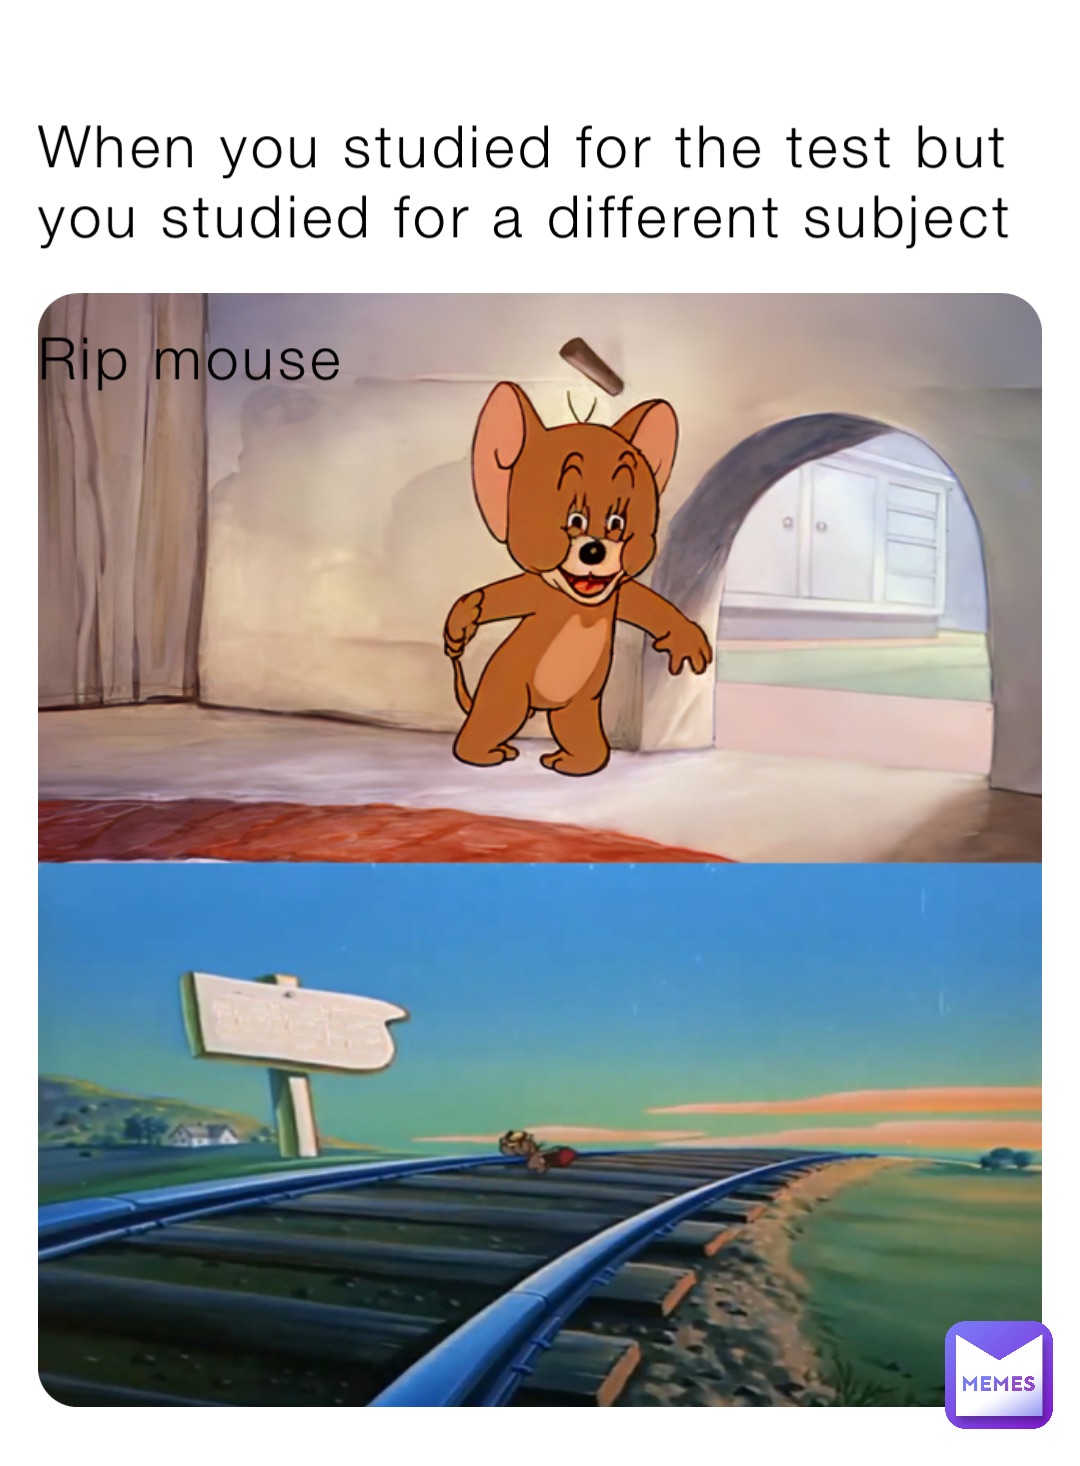 When you studied for the test but you studied for a different subject

Rip mouse